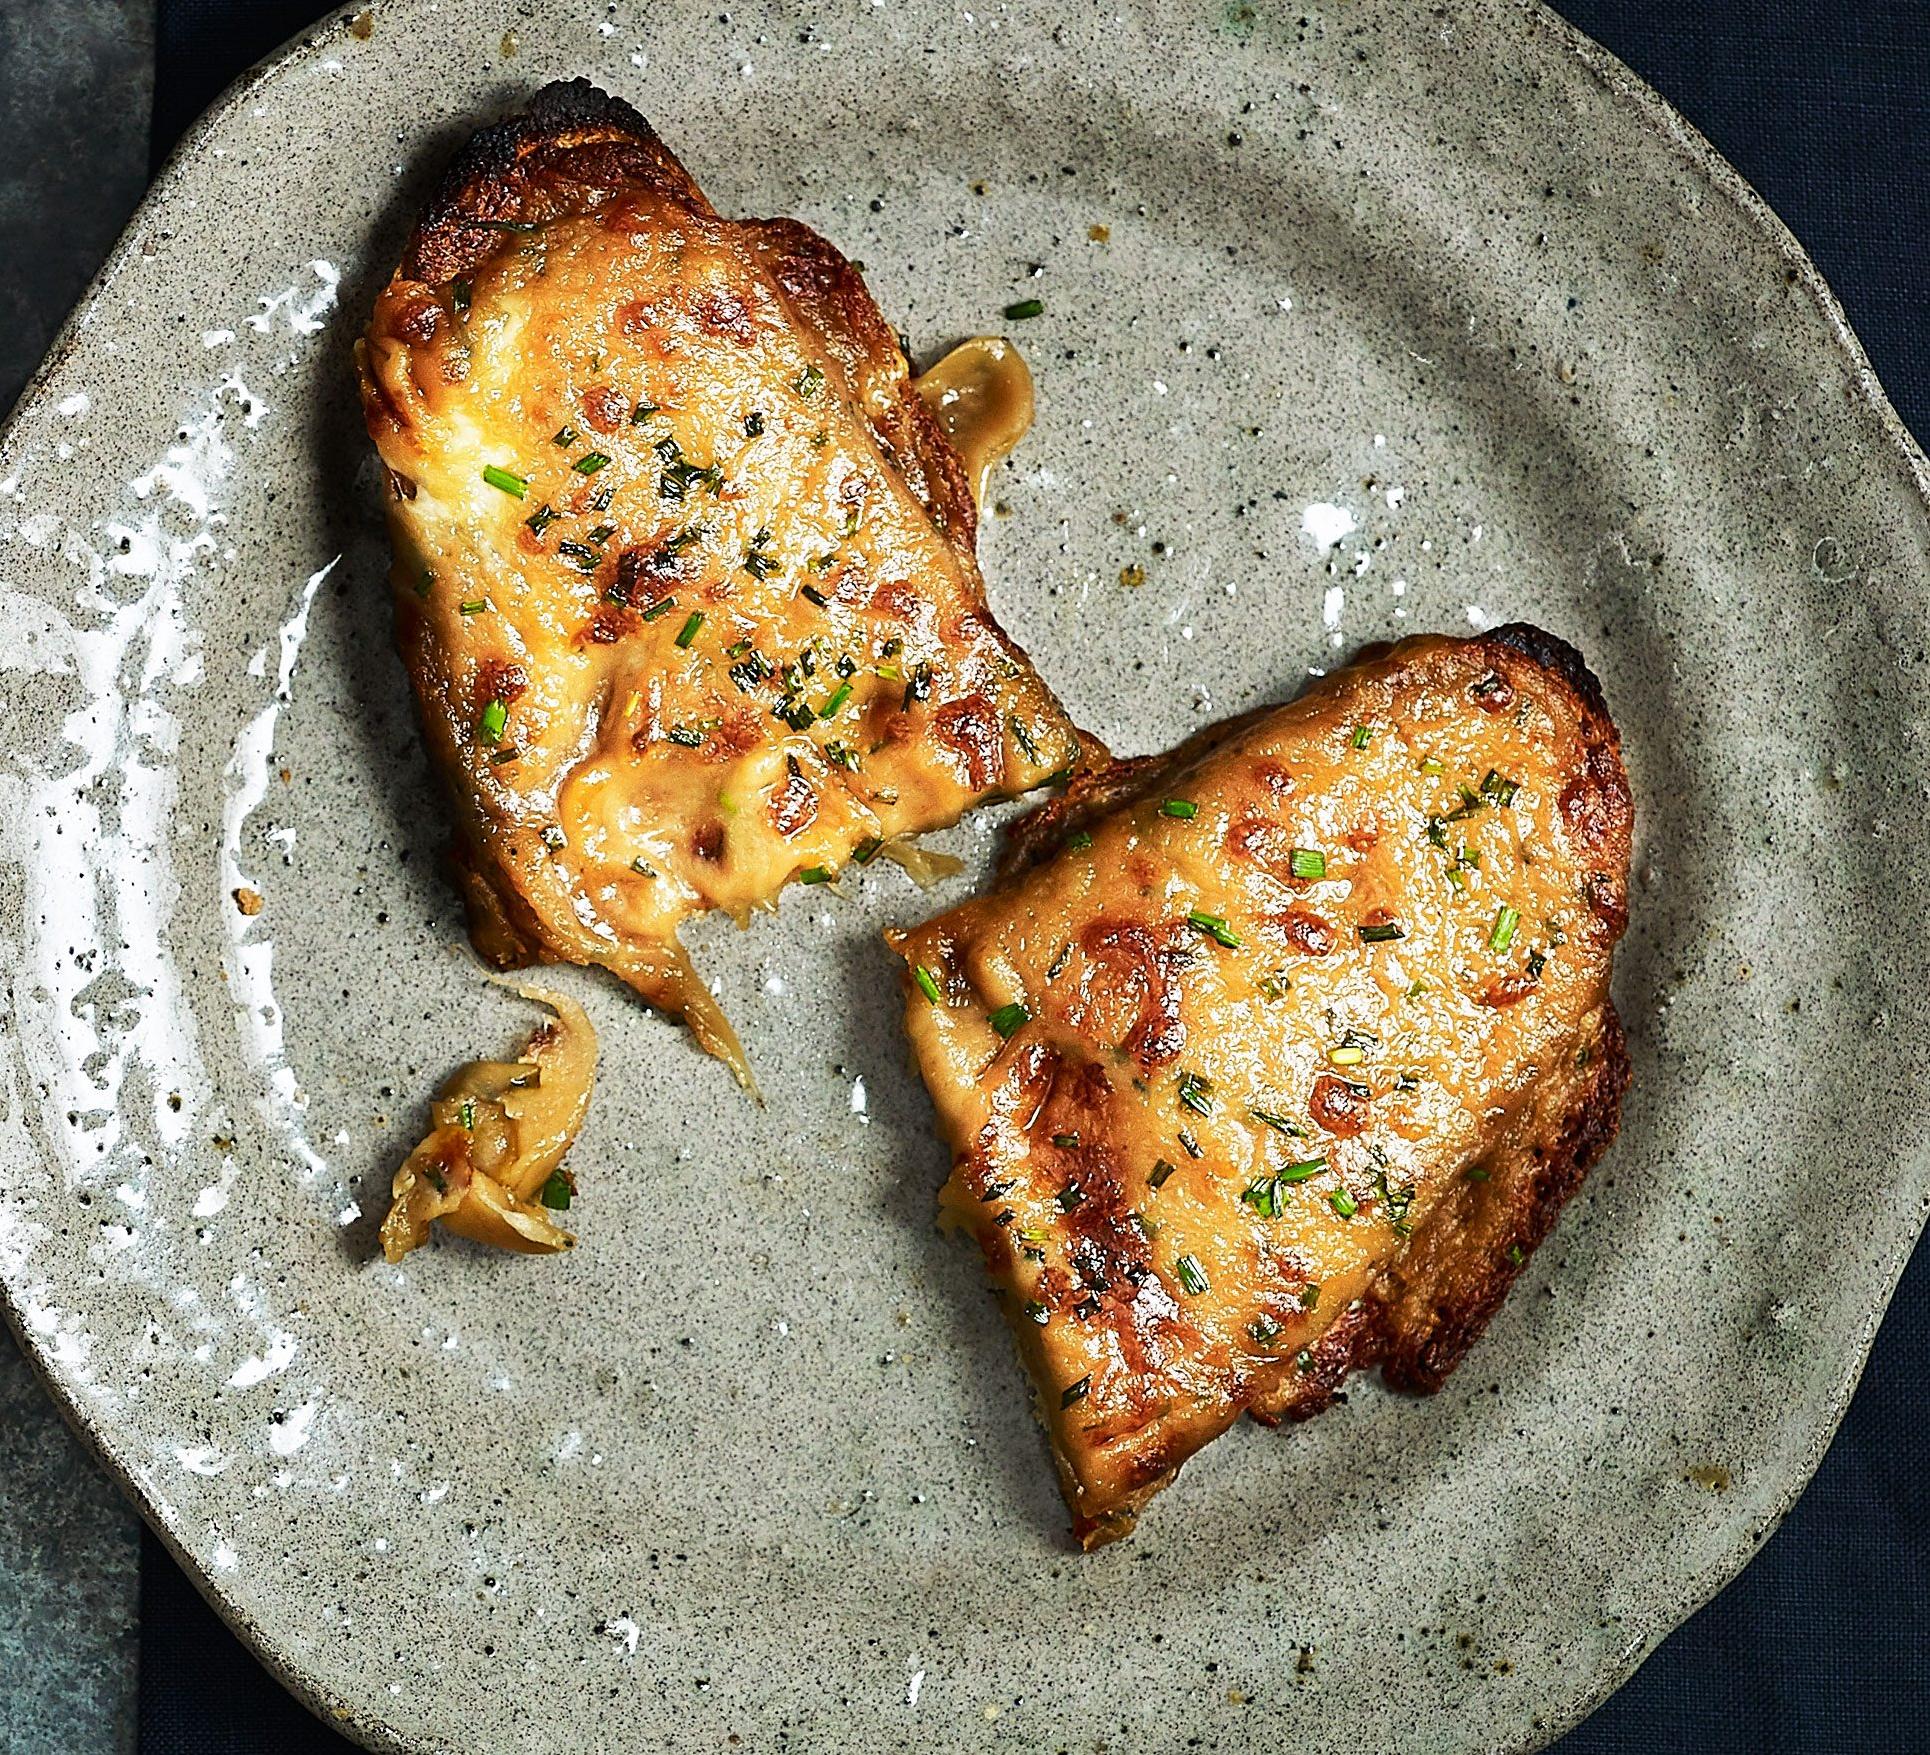  The star of the dish: melted, gooey, savory cheese on toast